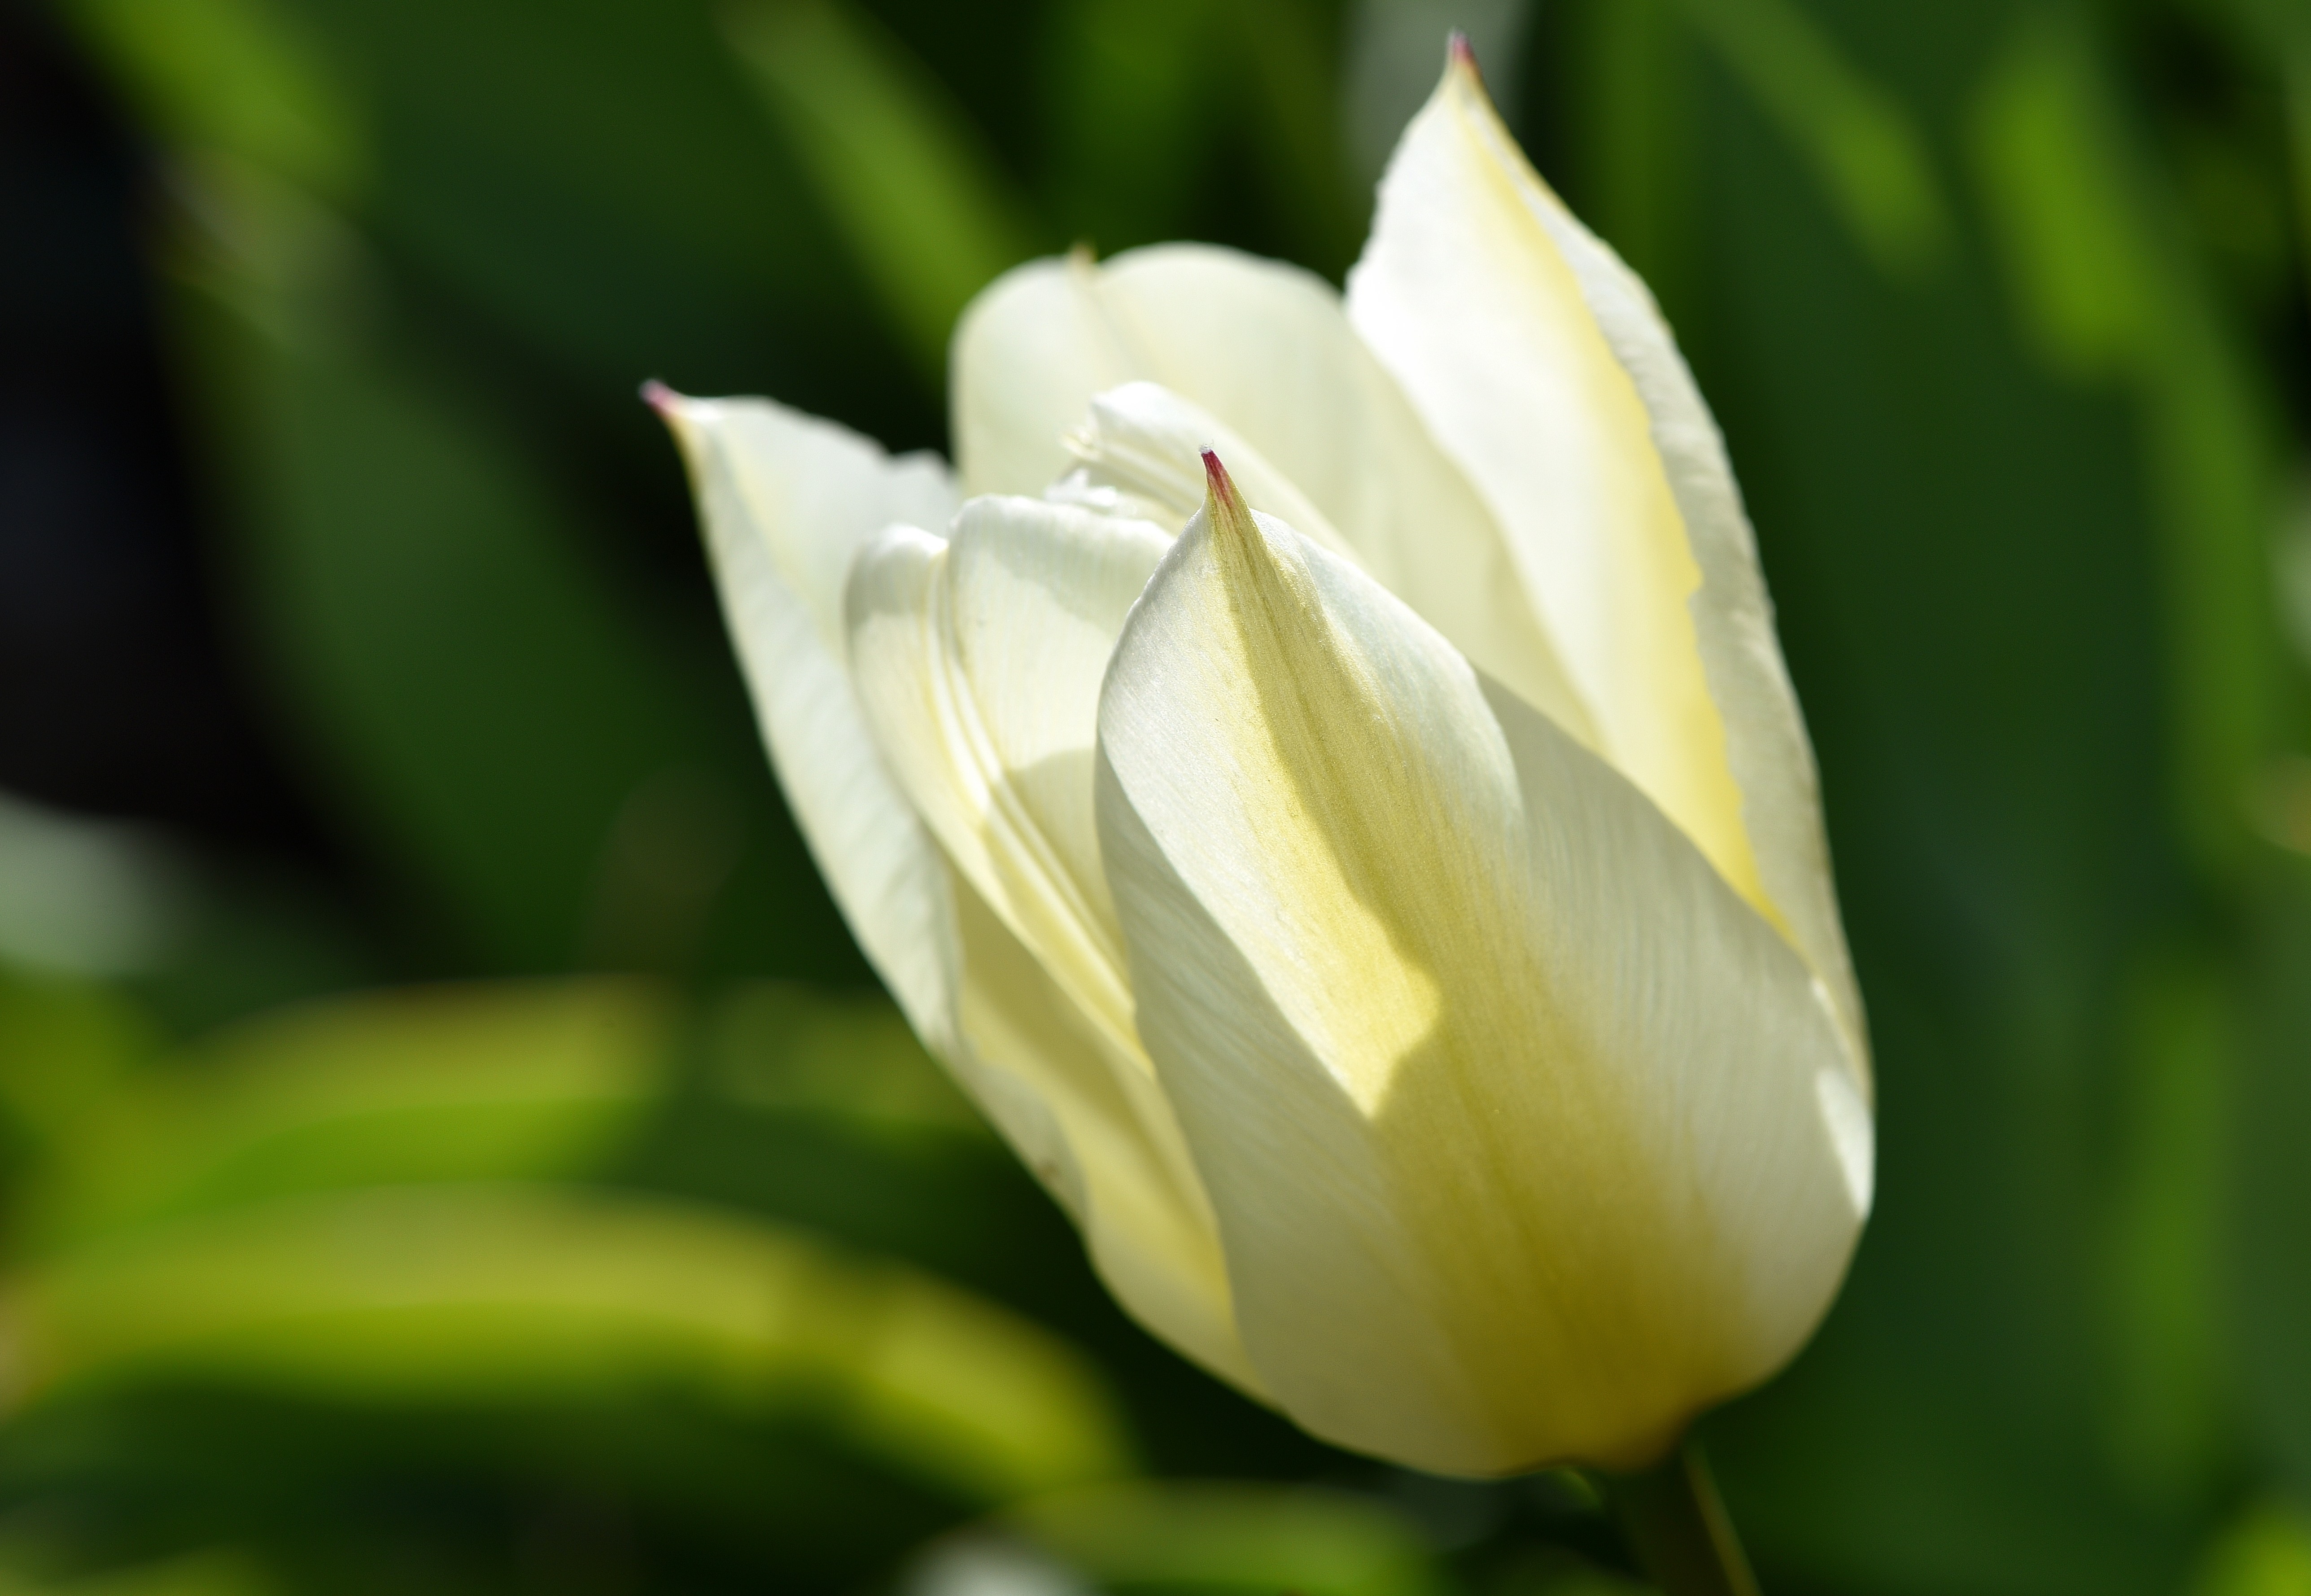 Blossom, Bloom, Tulip, Flower, green color, close-up